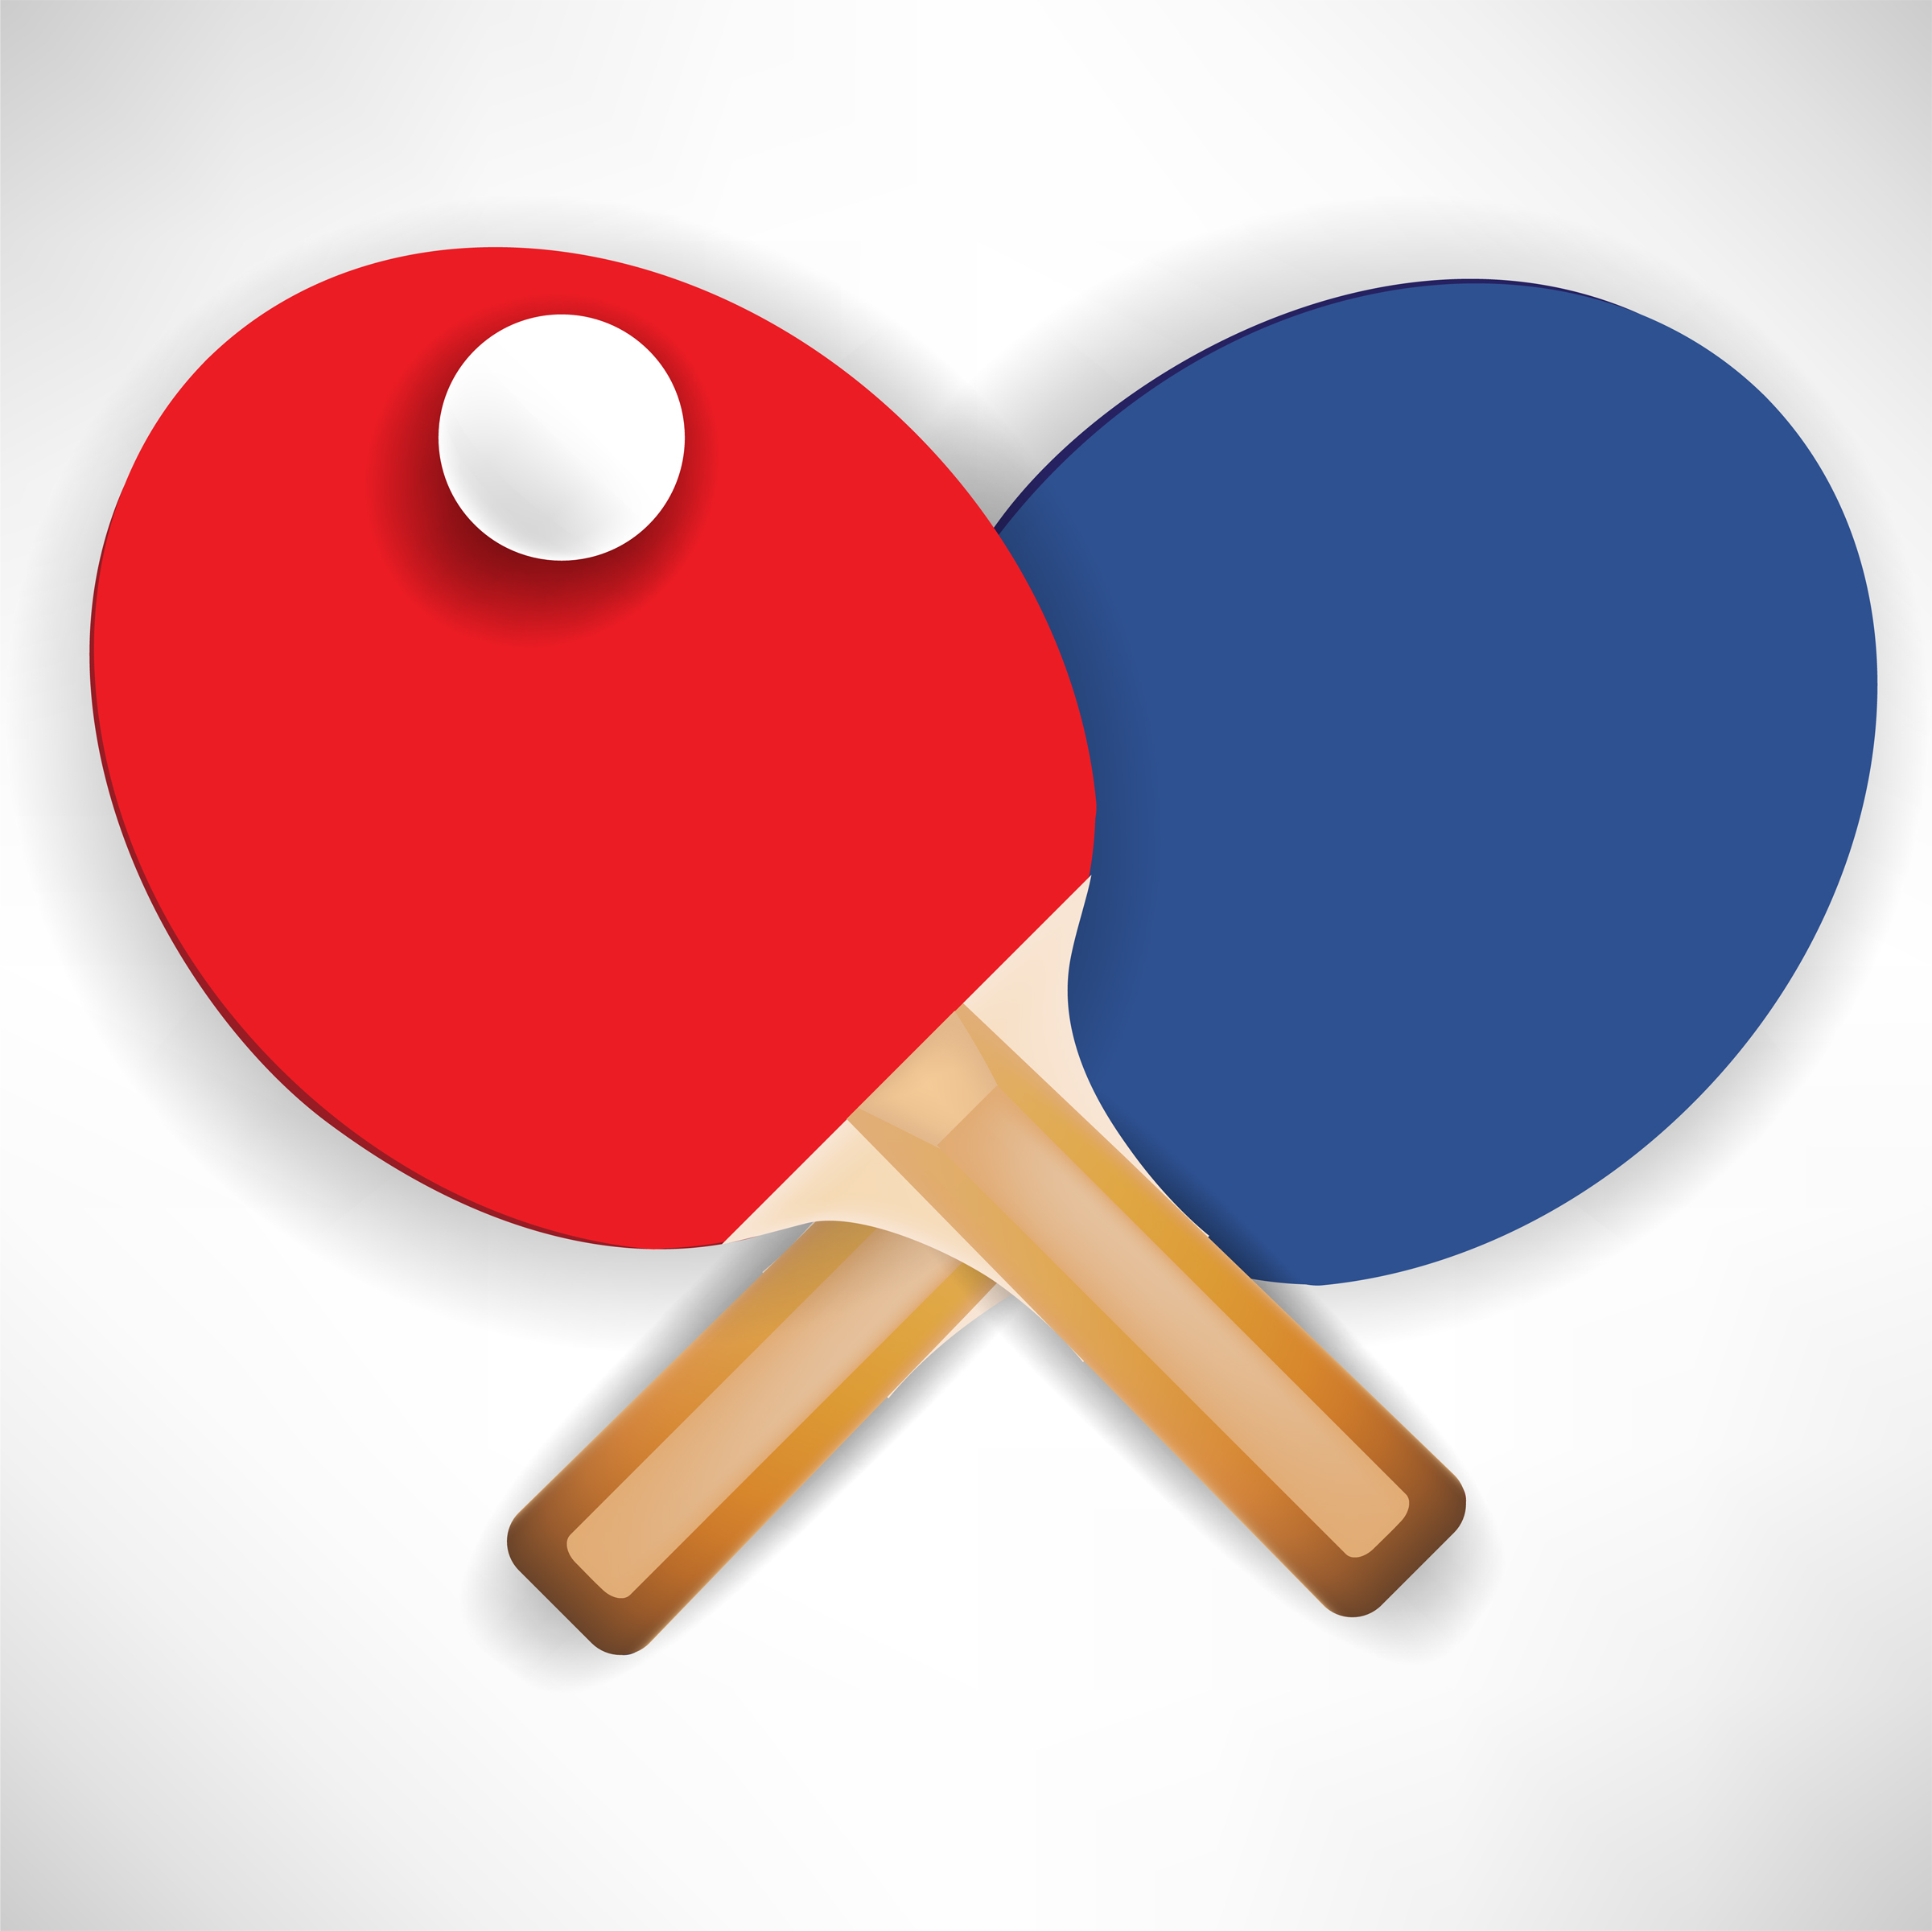 Ping Pong Clipart - Cliparts and Others Art Inspiration